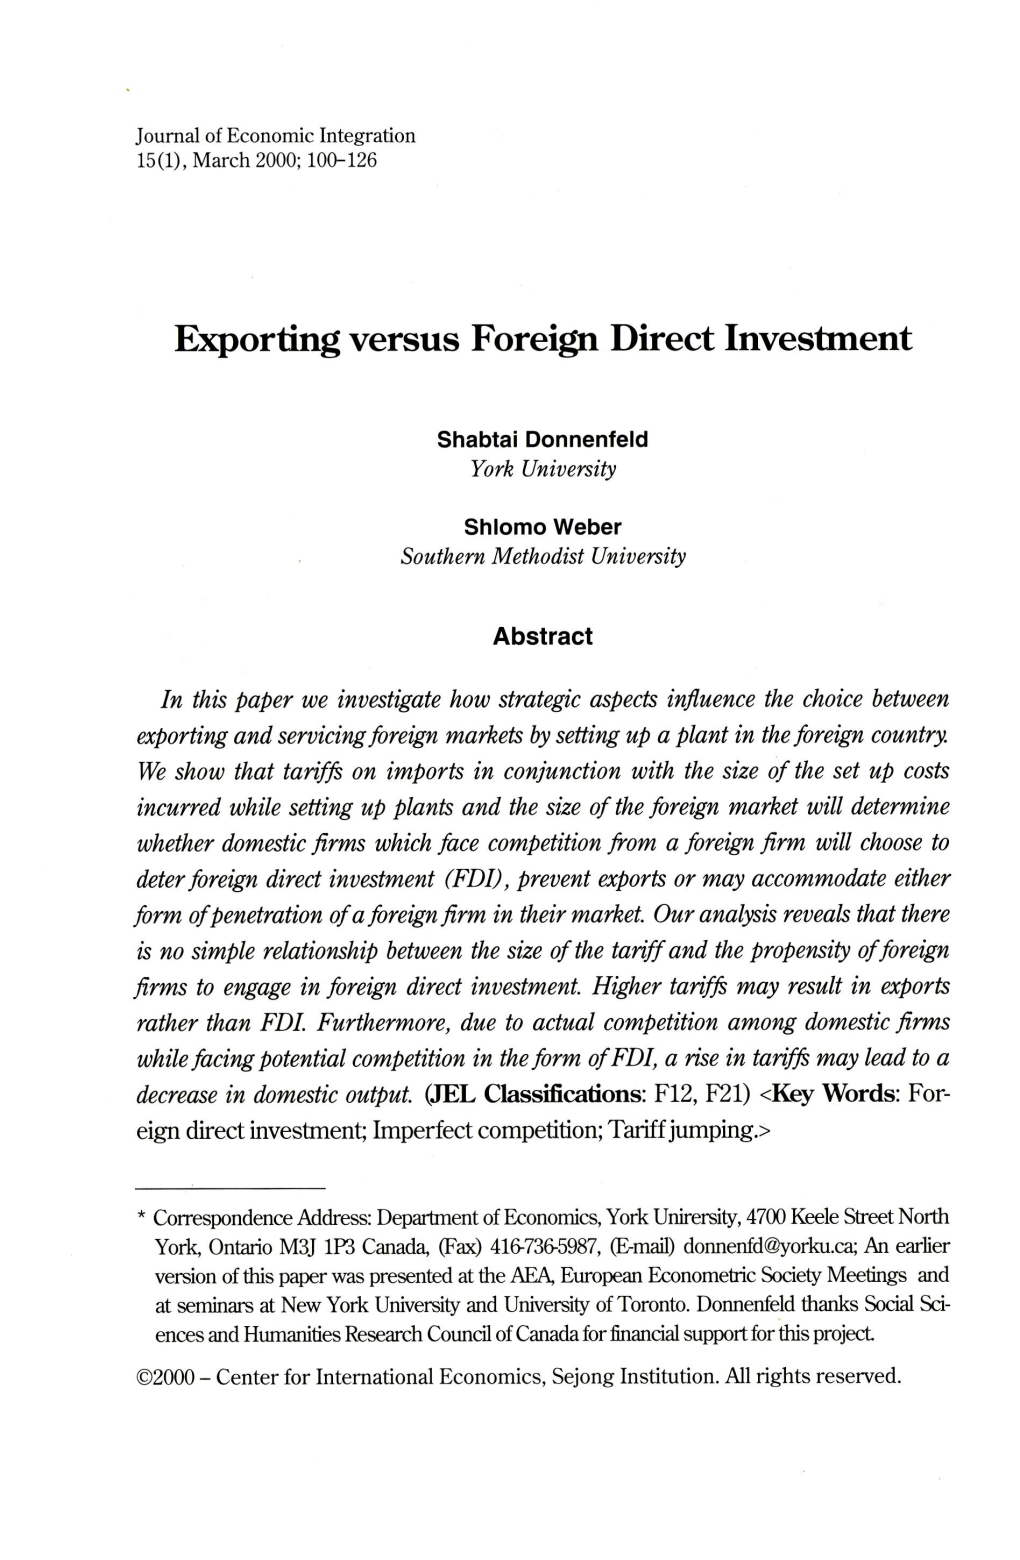 Exporting Versus Foreign Direct Investment